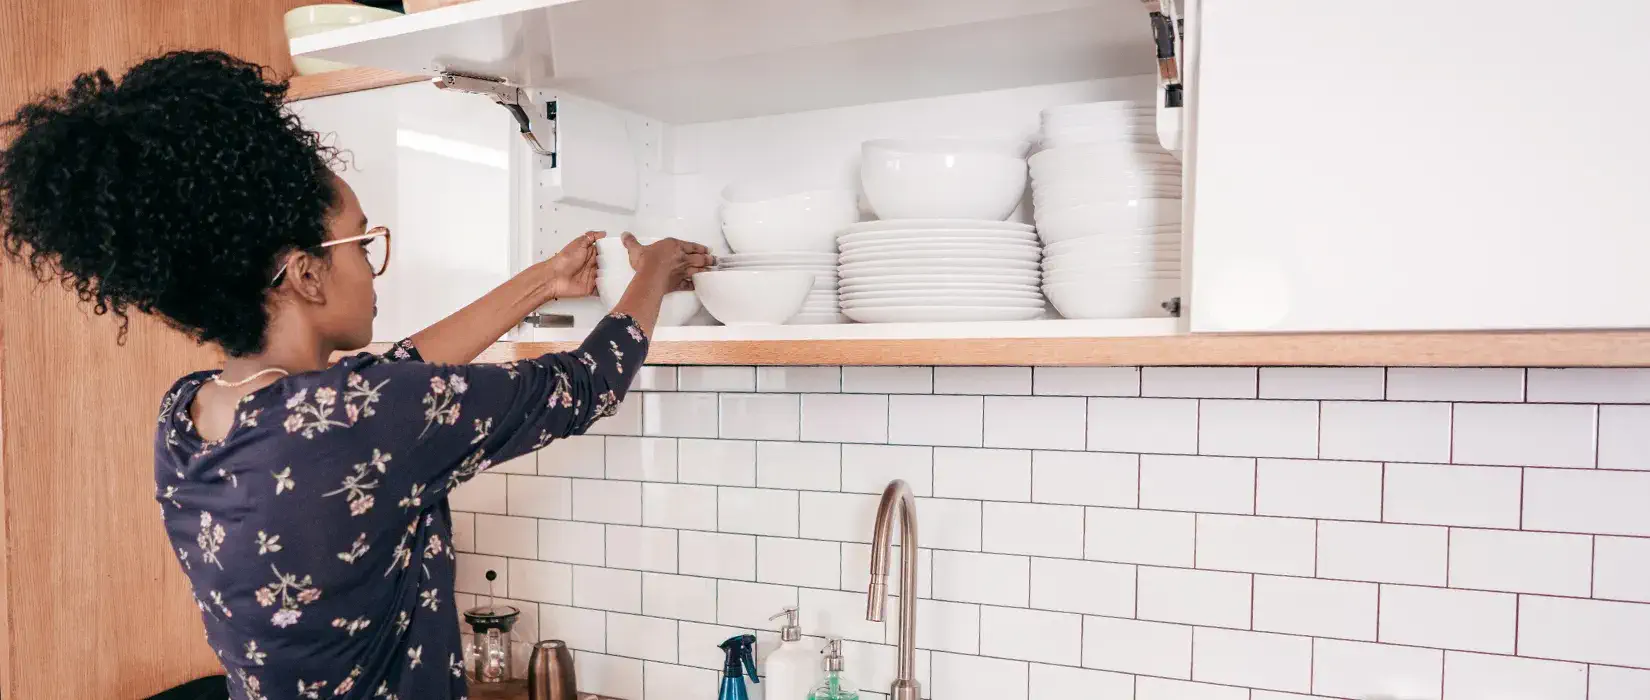 A woman organizing kitchen cabinets with dishware.